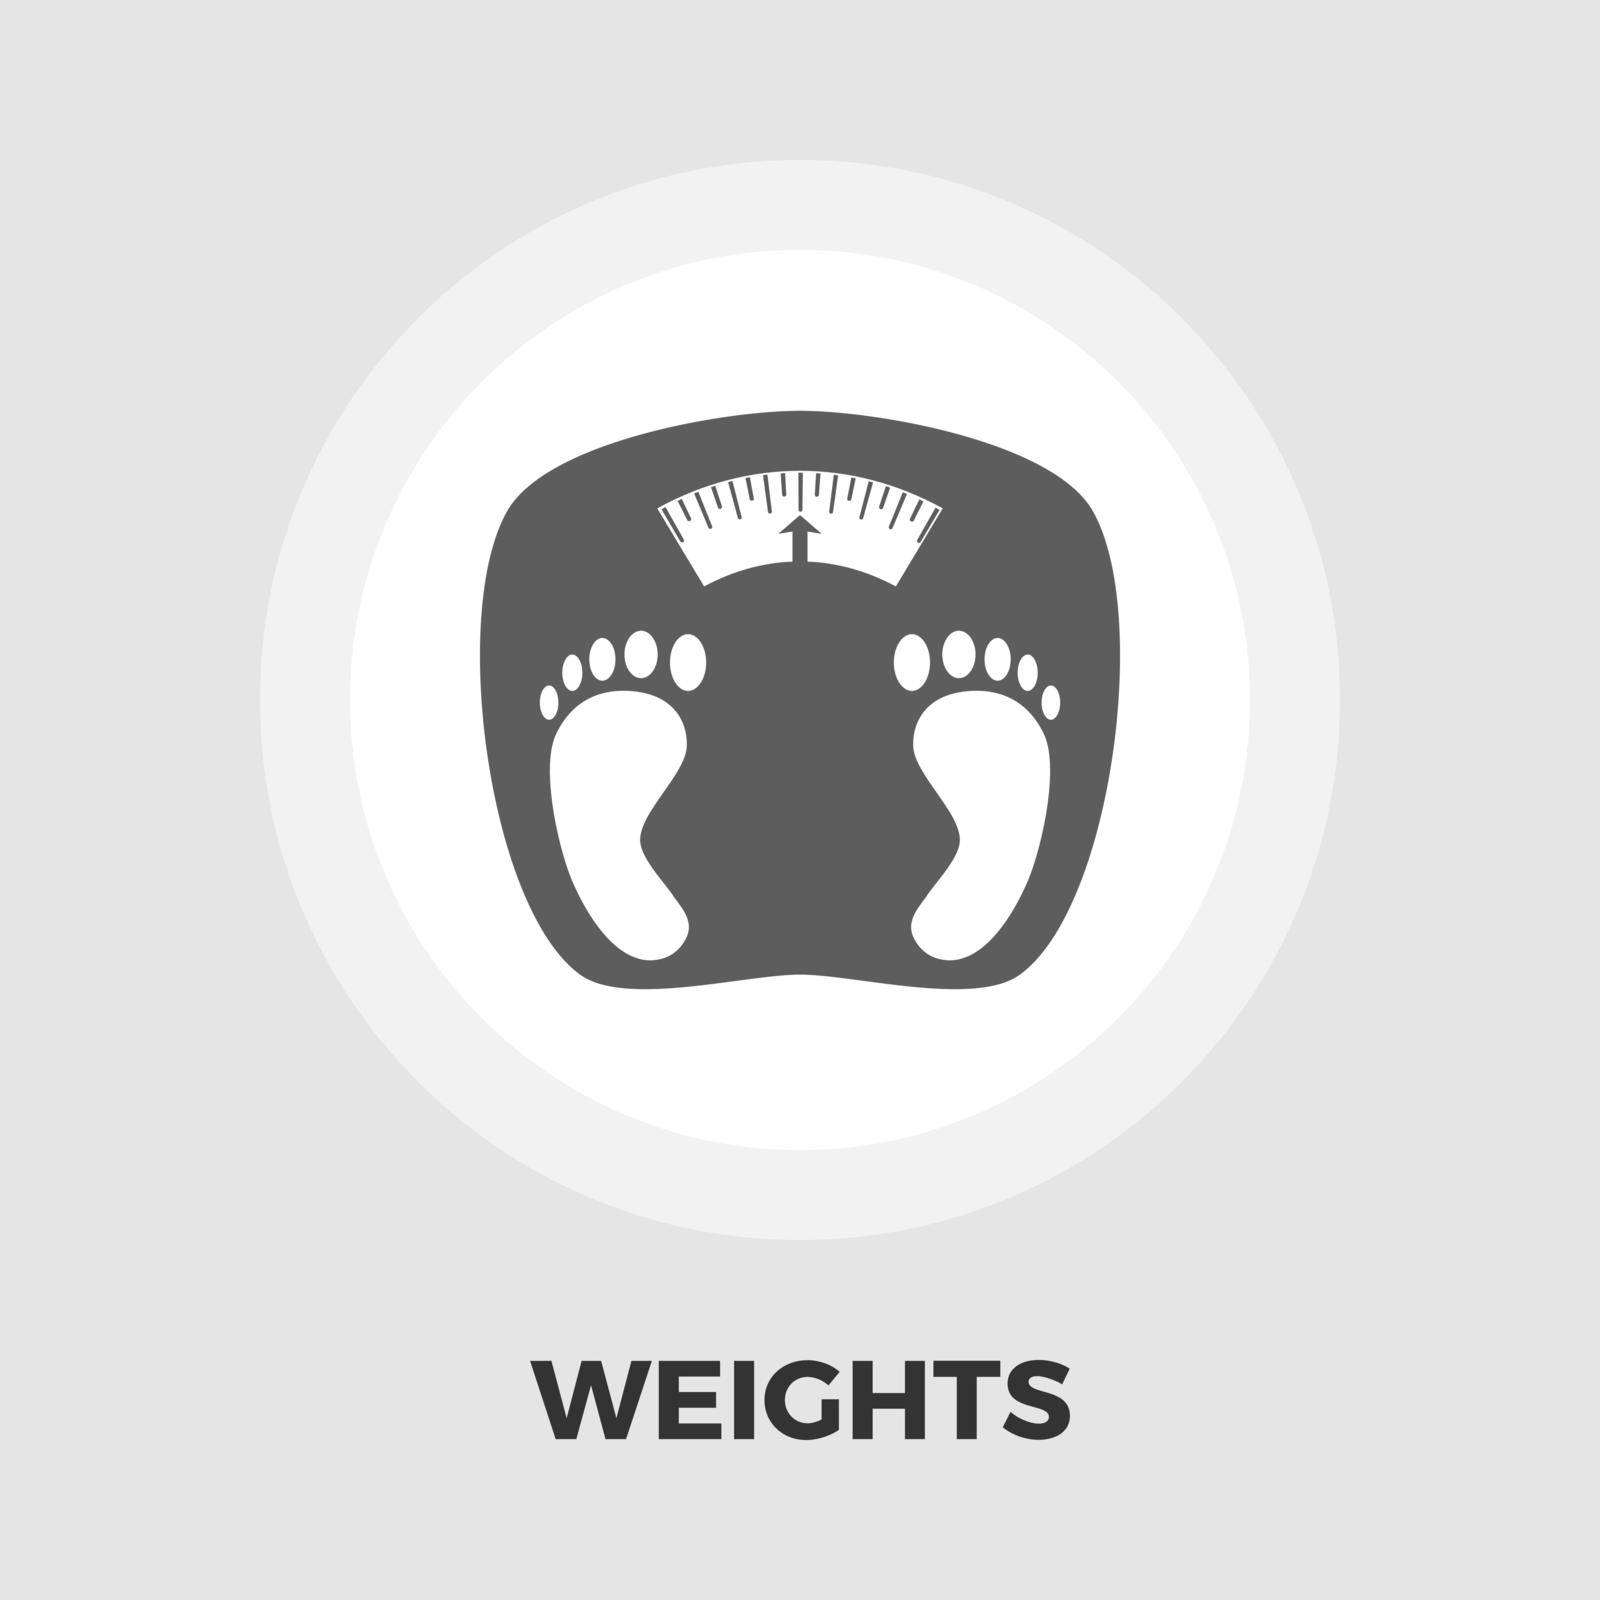 Weights icon vector. Flat icon isolated on the white background. Editable EPS file. Vector illustration.